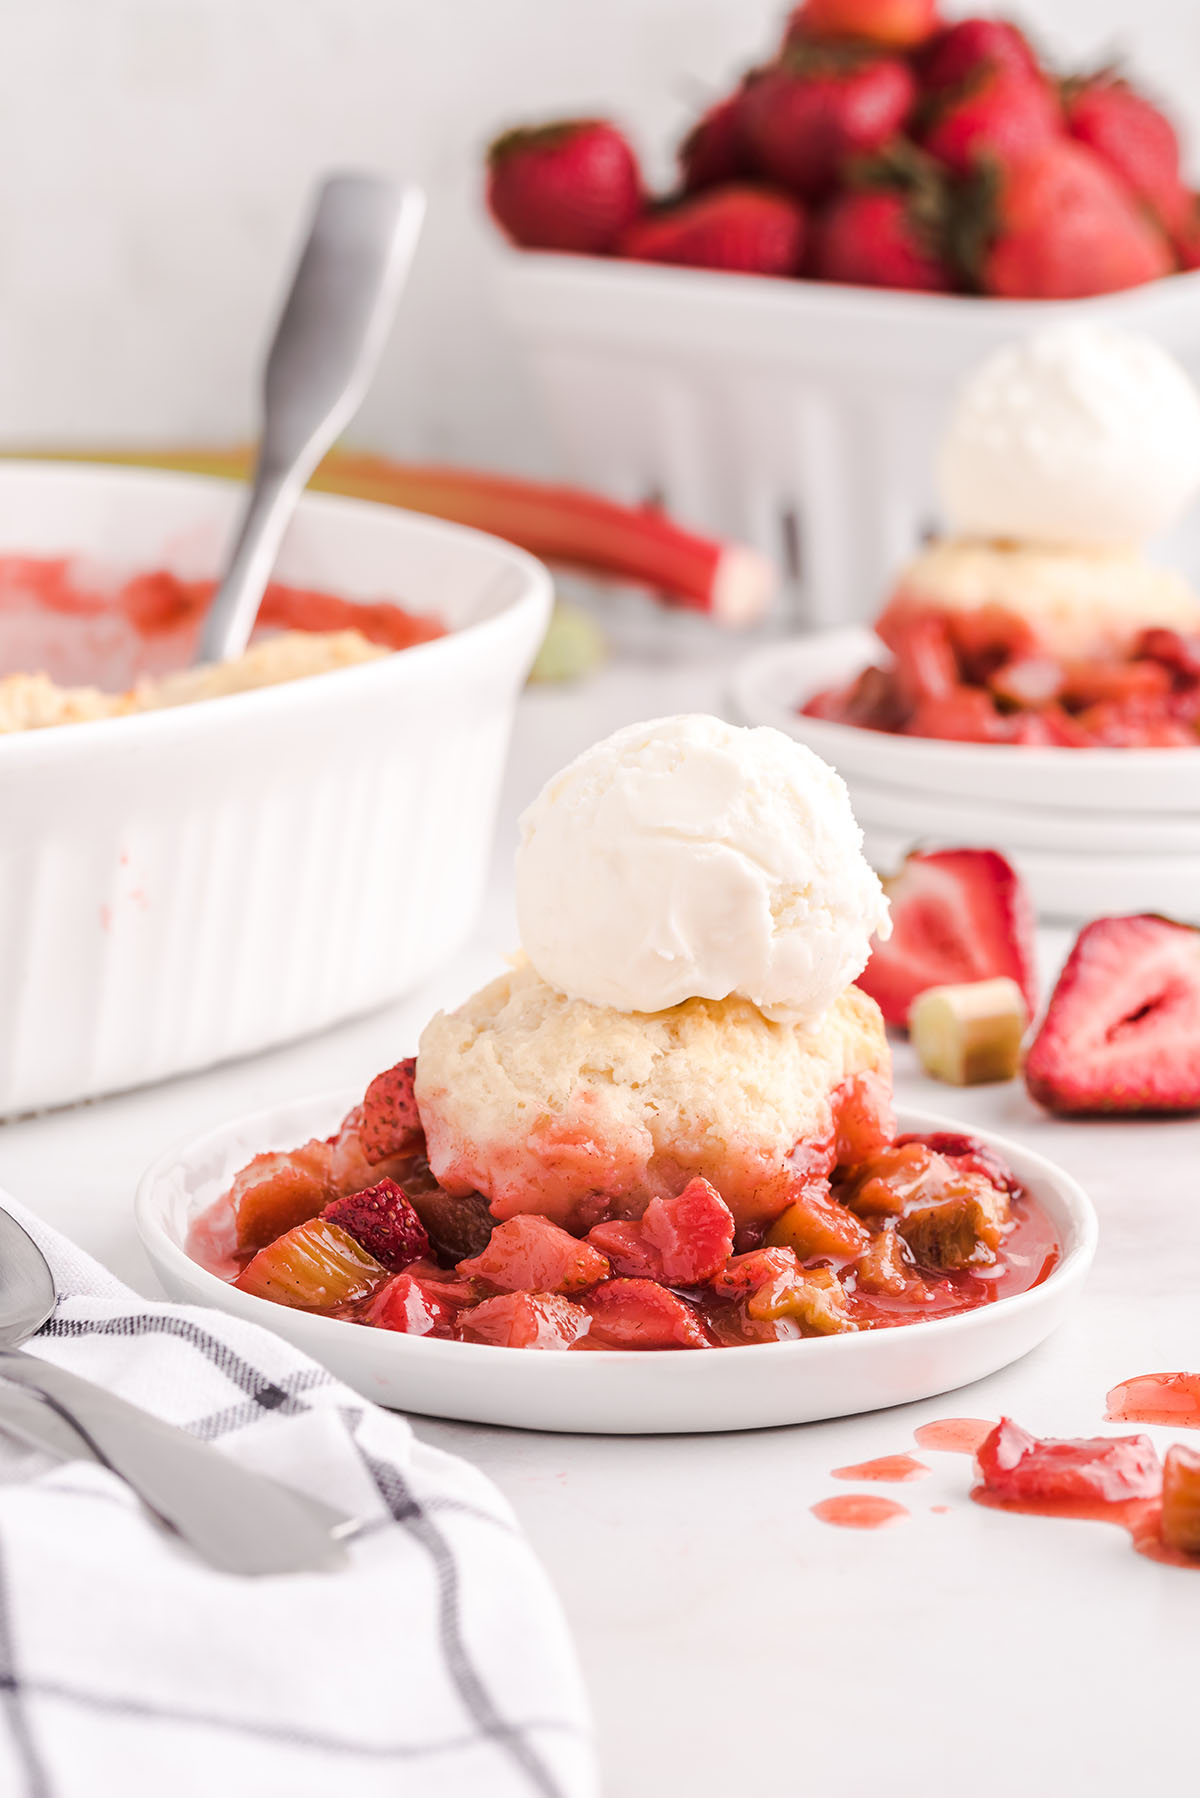 strawberry rhubarb cobbler with ice cream on top on a white plate.